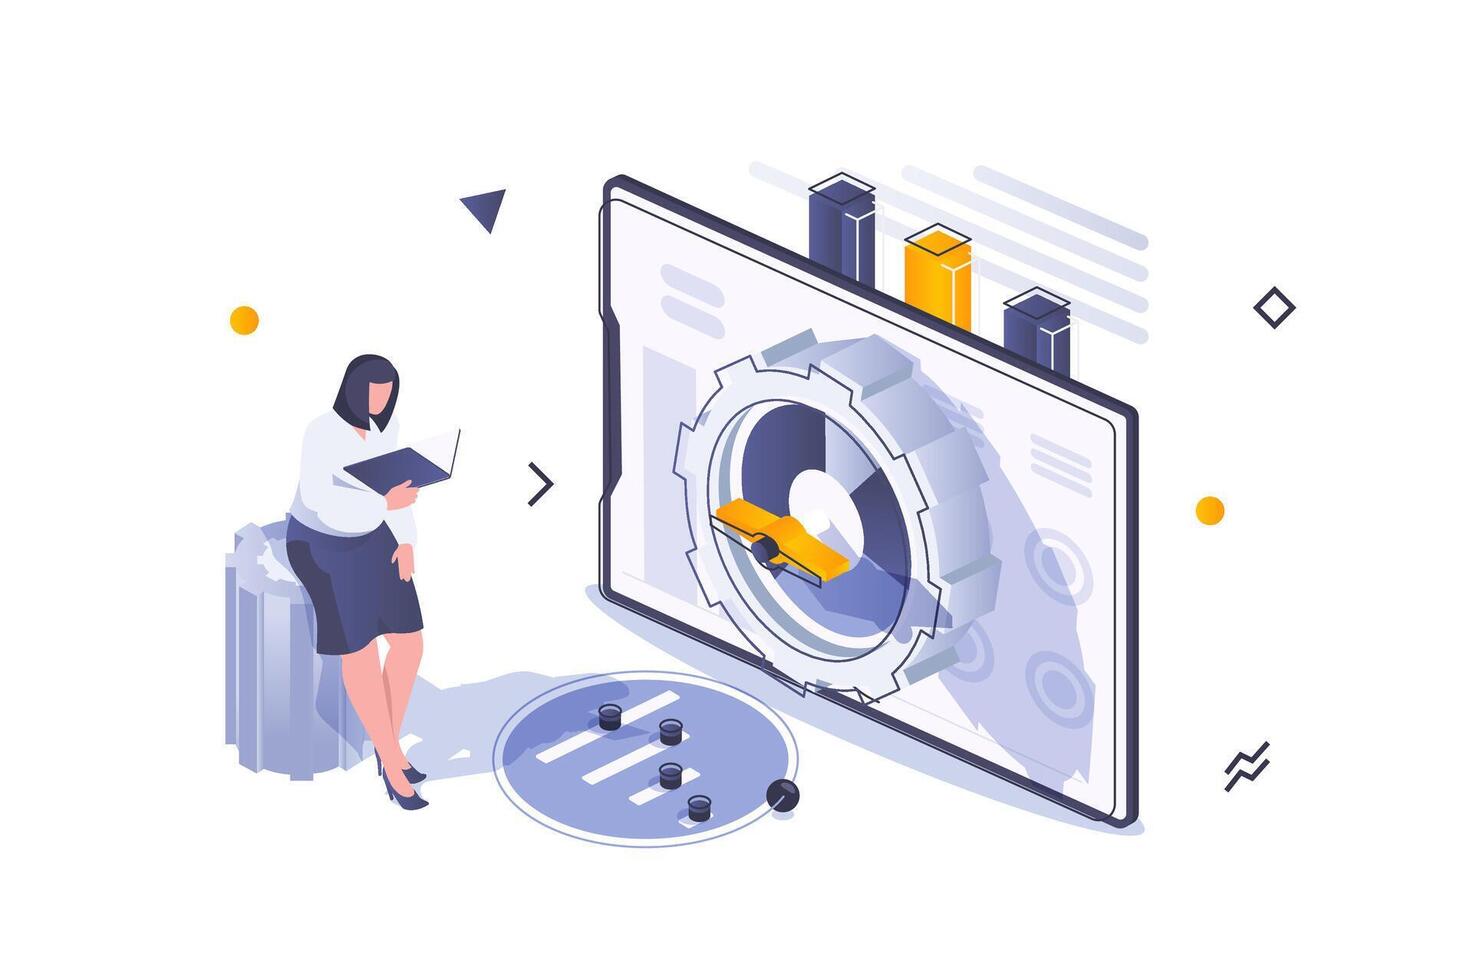 Business marketing concept in 3d isometric design. Businesswoman working with financial data, investing money and making bank deposit. Vector illustration with isometric people scene for web graphic